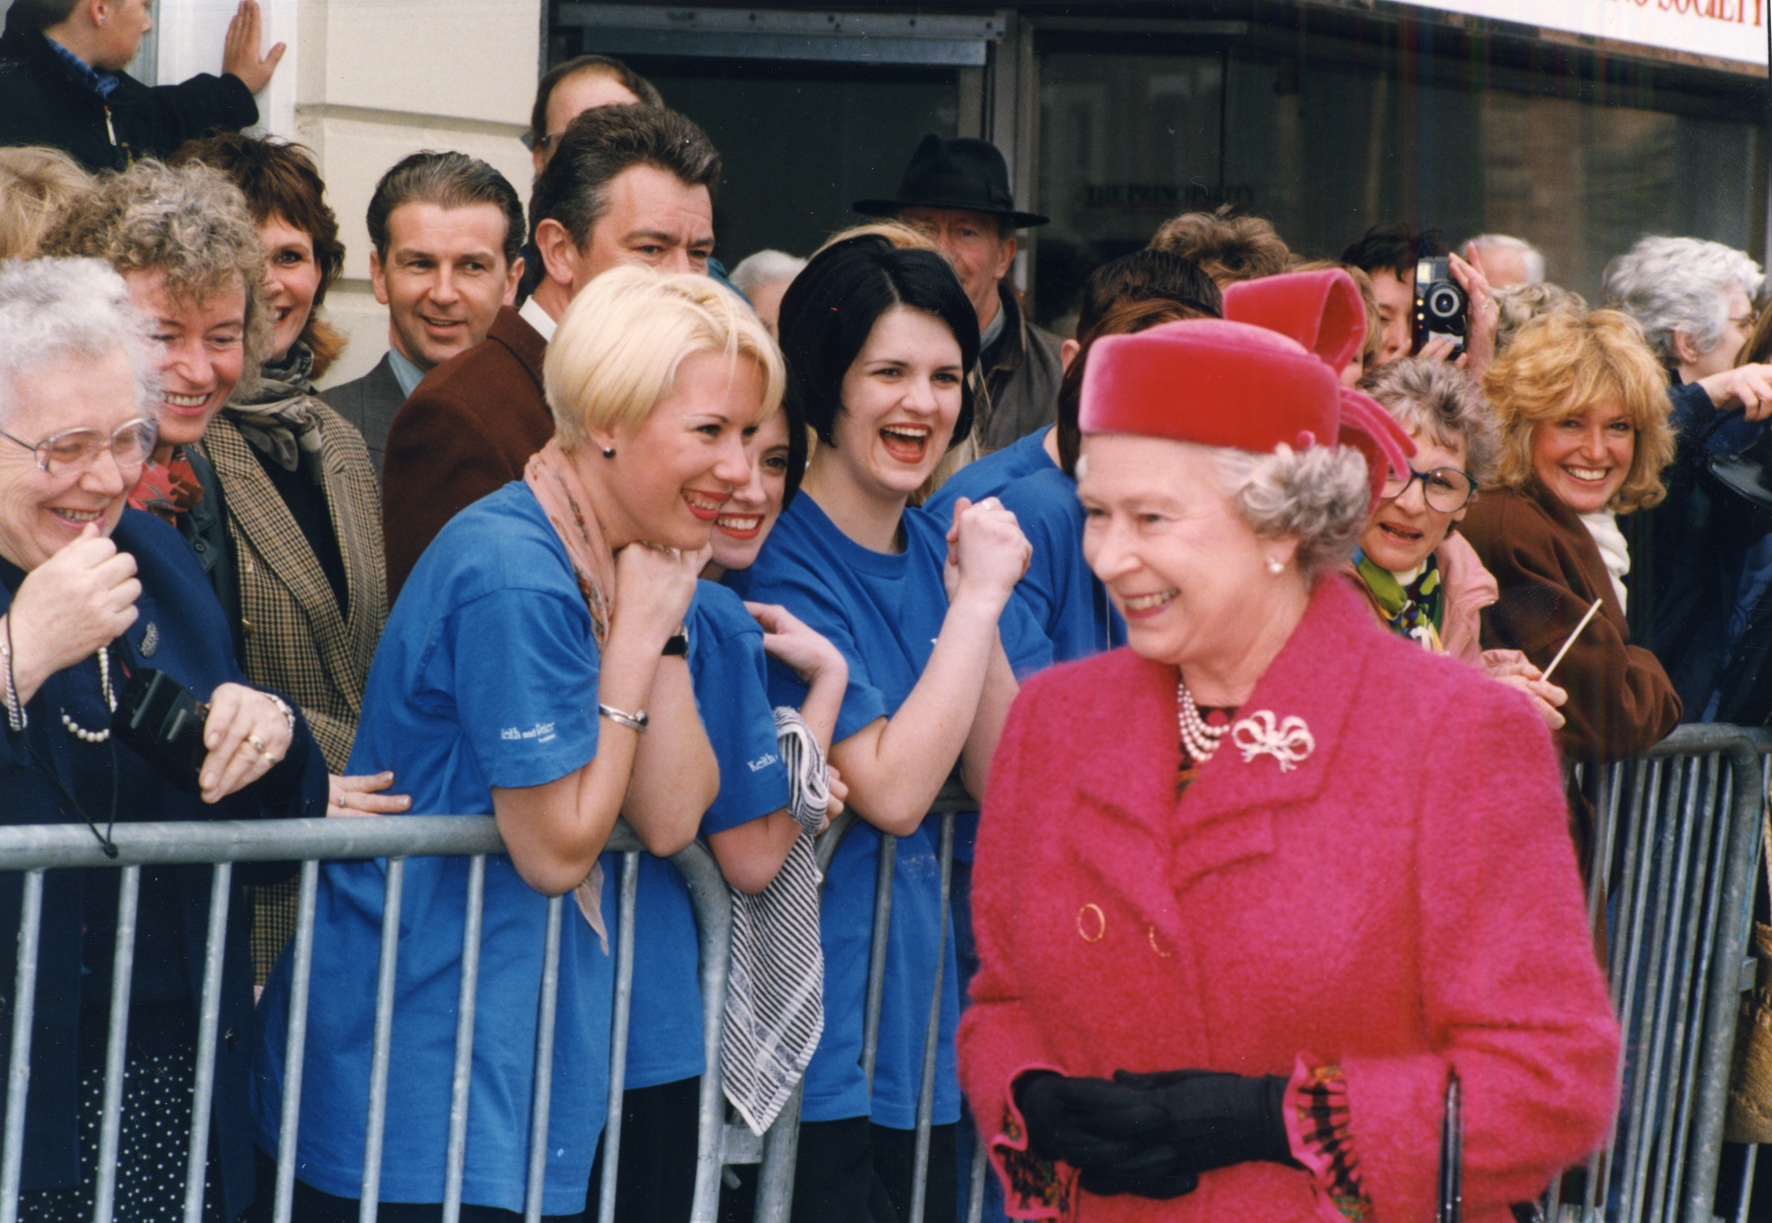 The Queen shares a joke with the staff of Keith and Peter’s hairdressers during a visit to Hereford in 1996